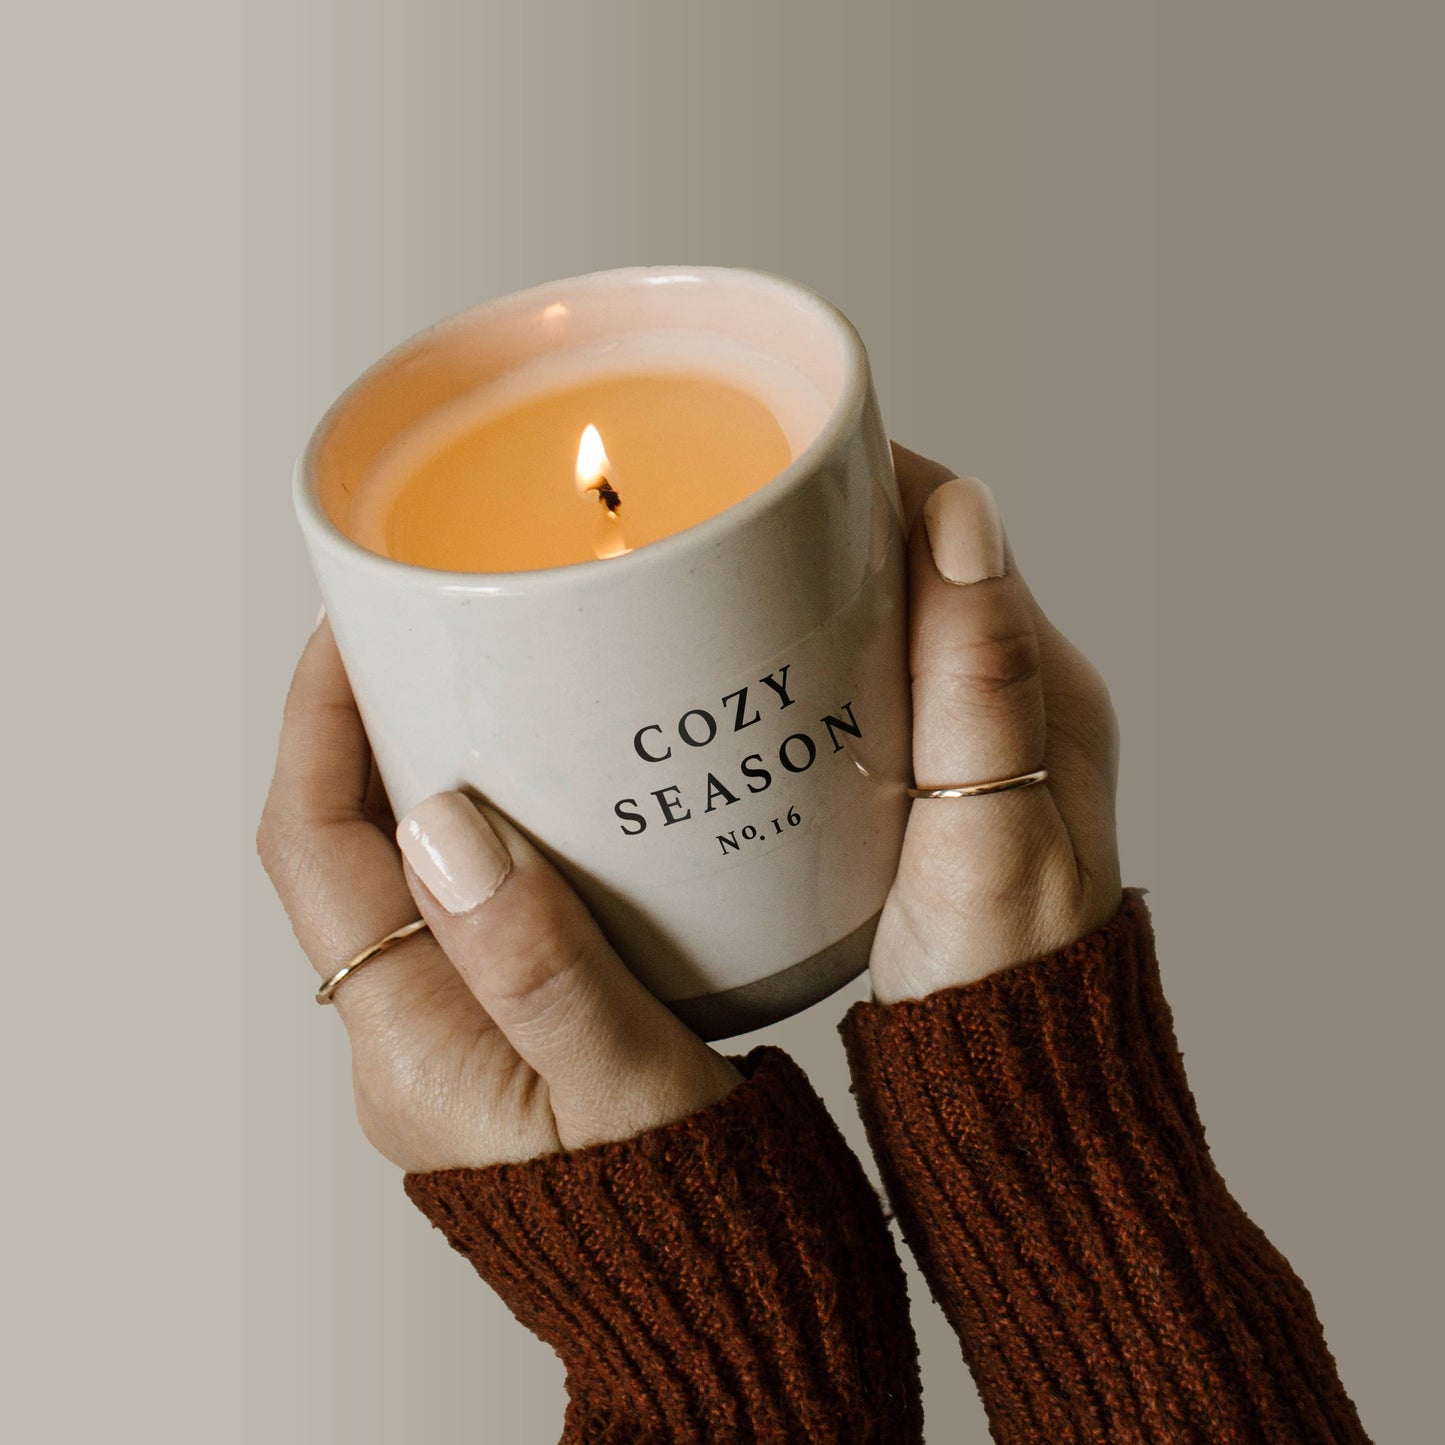 Cozy Season 12 oz Soy Candle - Fall Home Decor & Gifts